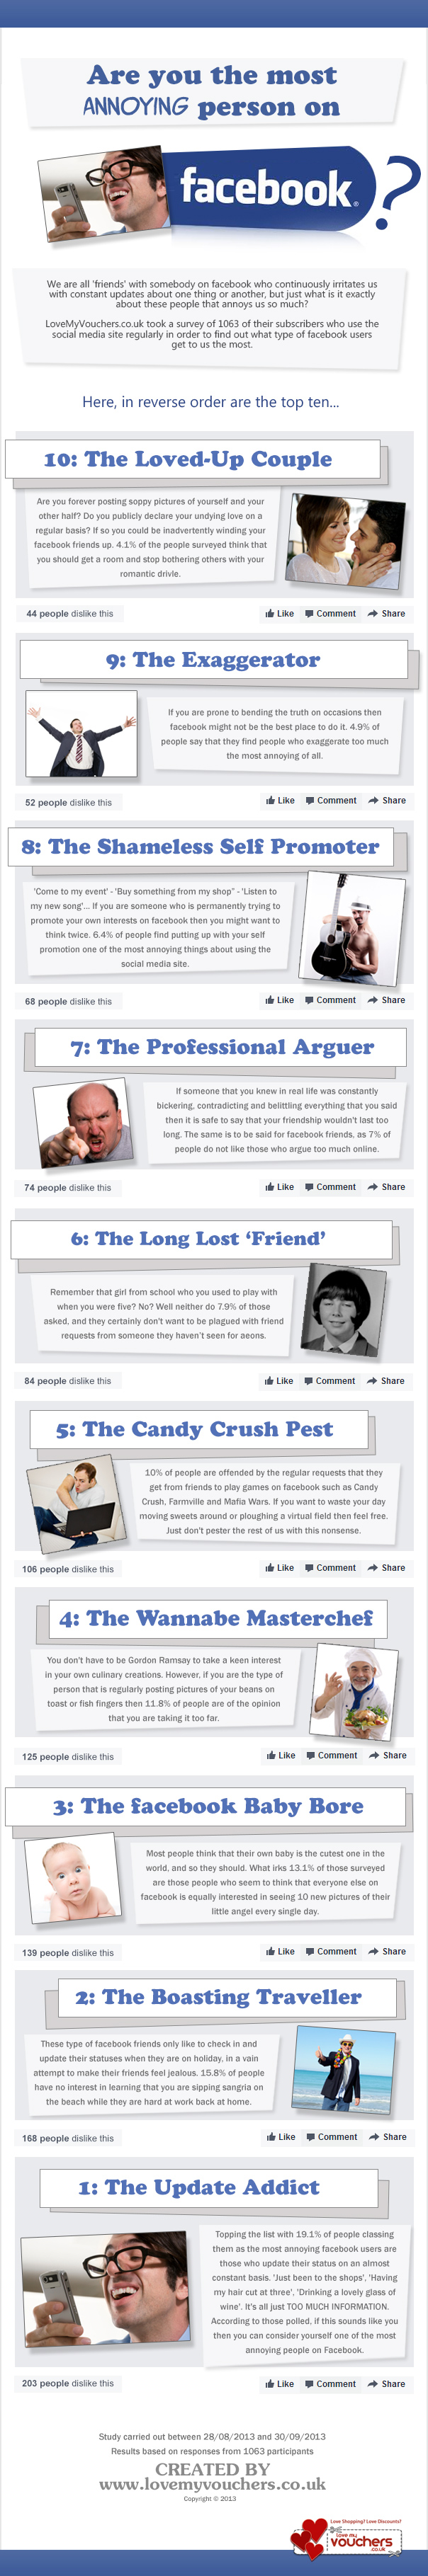 Are You The Most Annoying Person On Facebook?